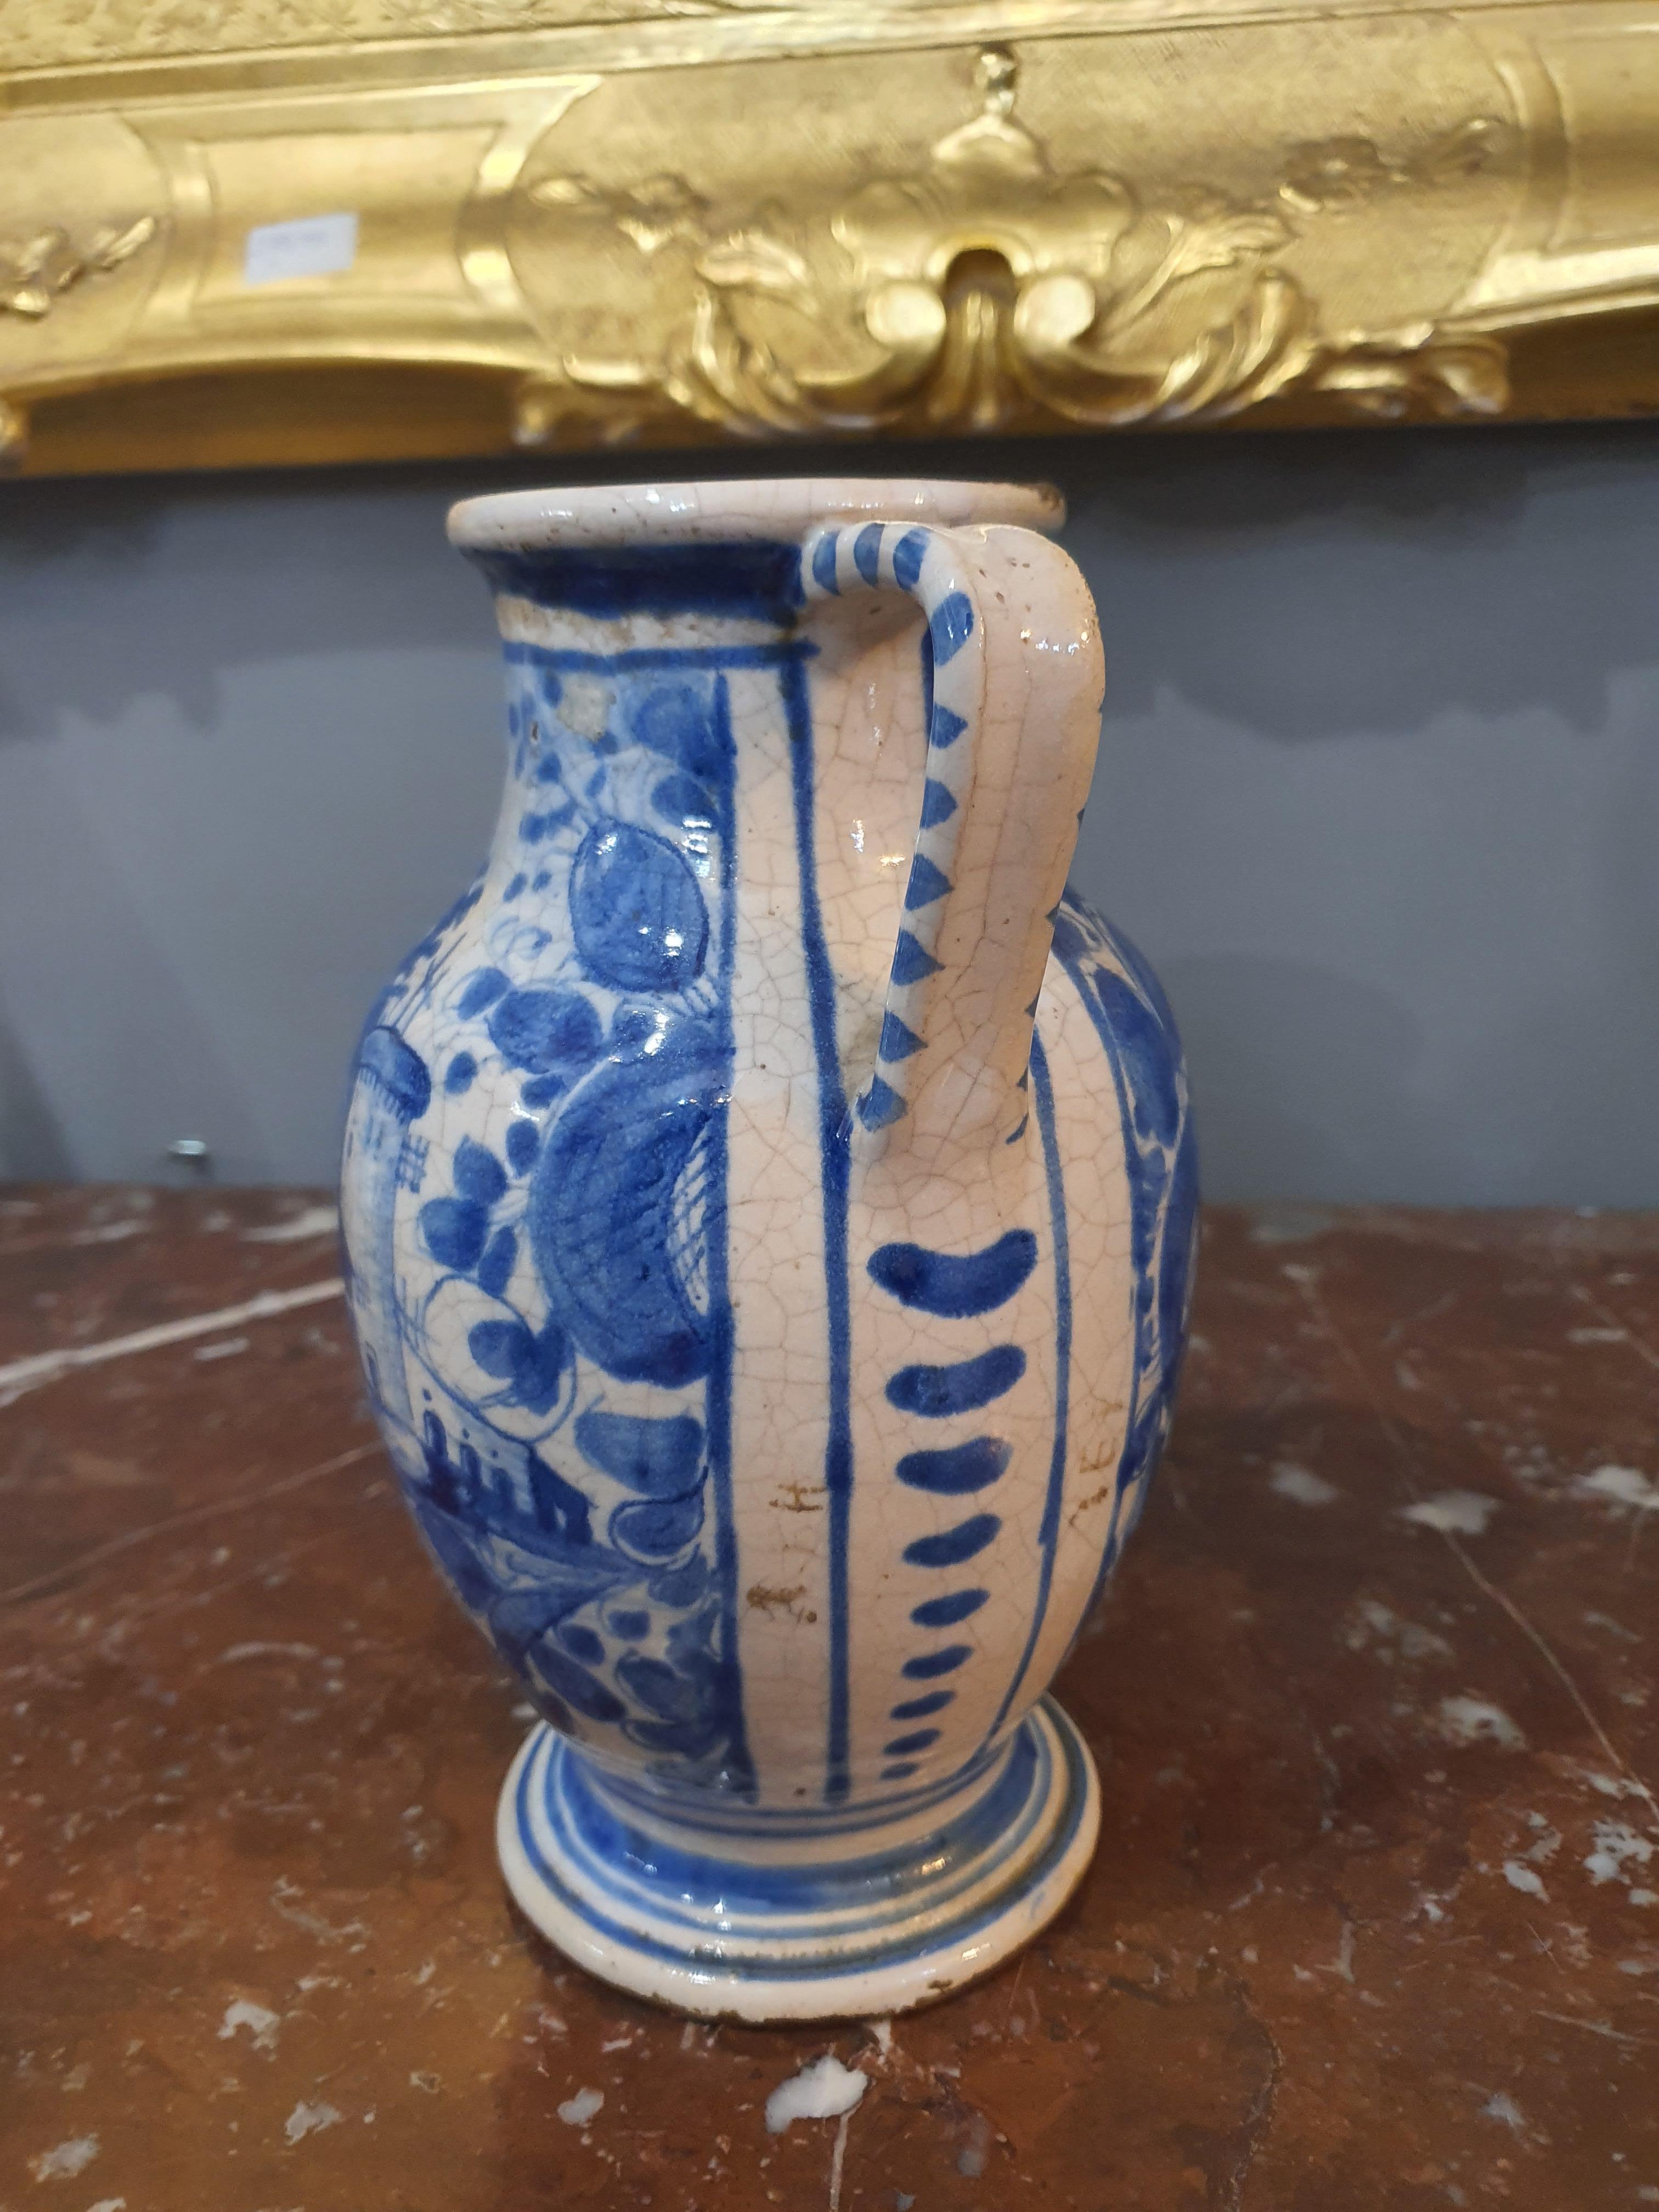 Pharmacy jug. Faenza, Italy. Majolica painted in blue monochrome, on a blue enameled background called berettino and tints of tin white.